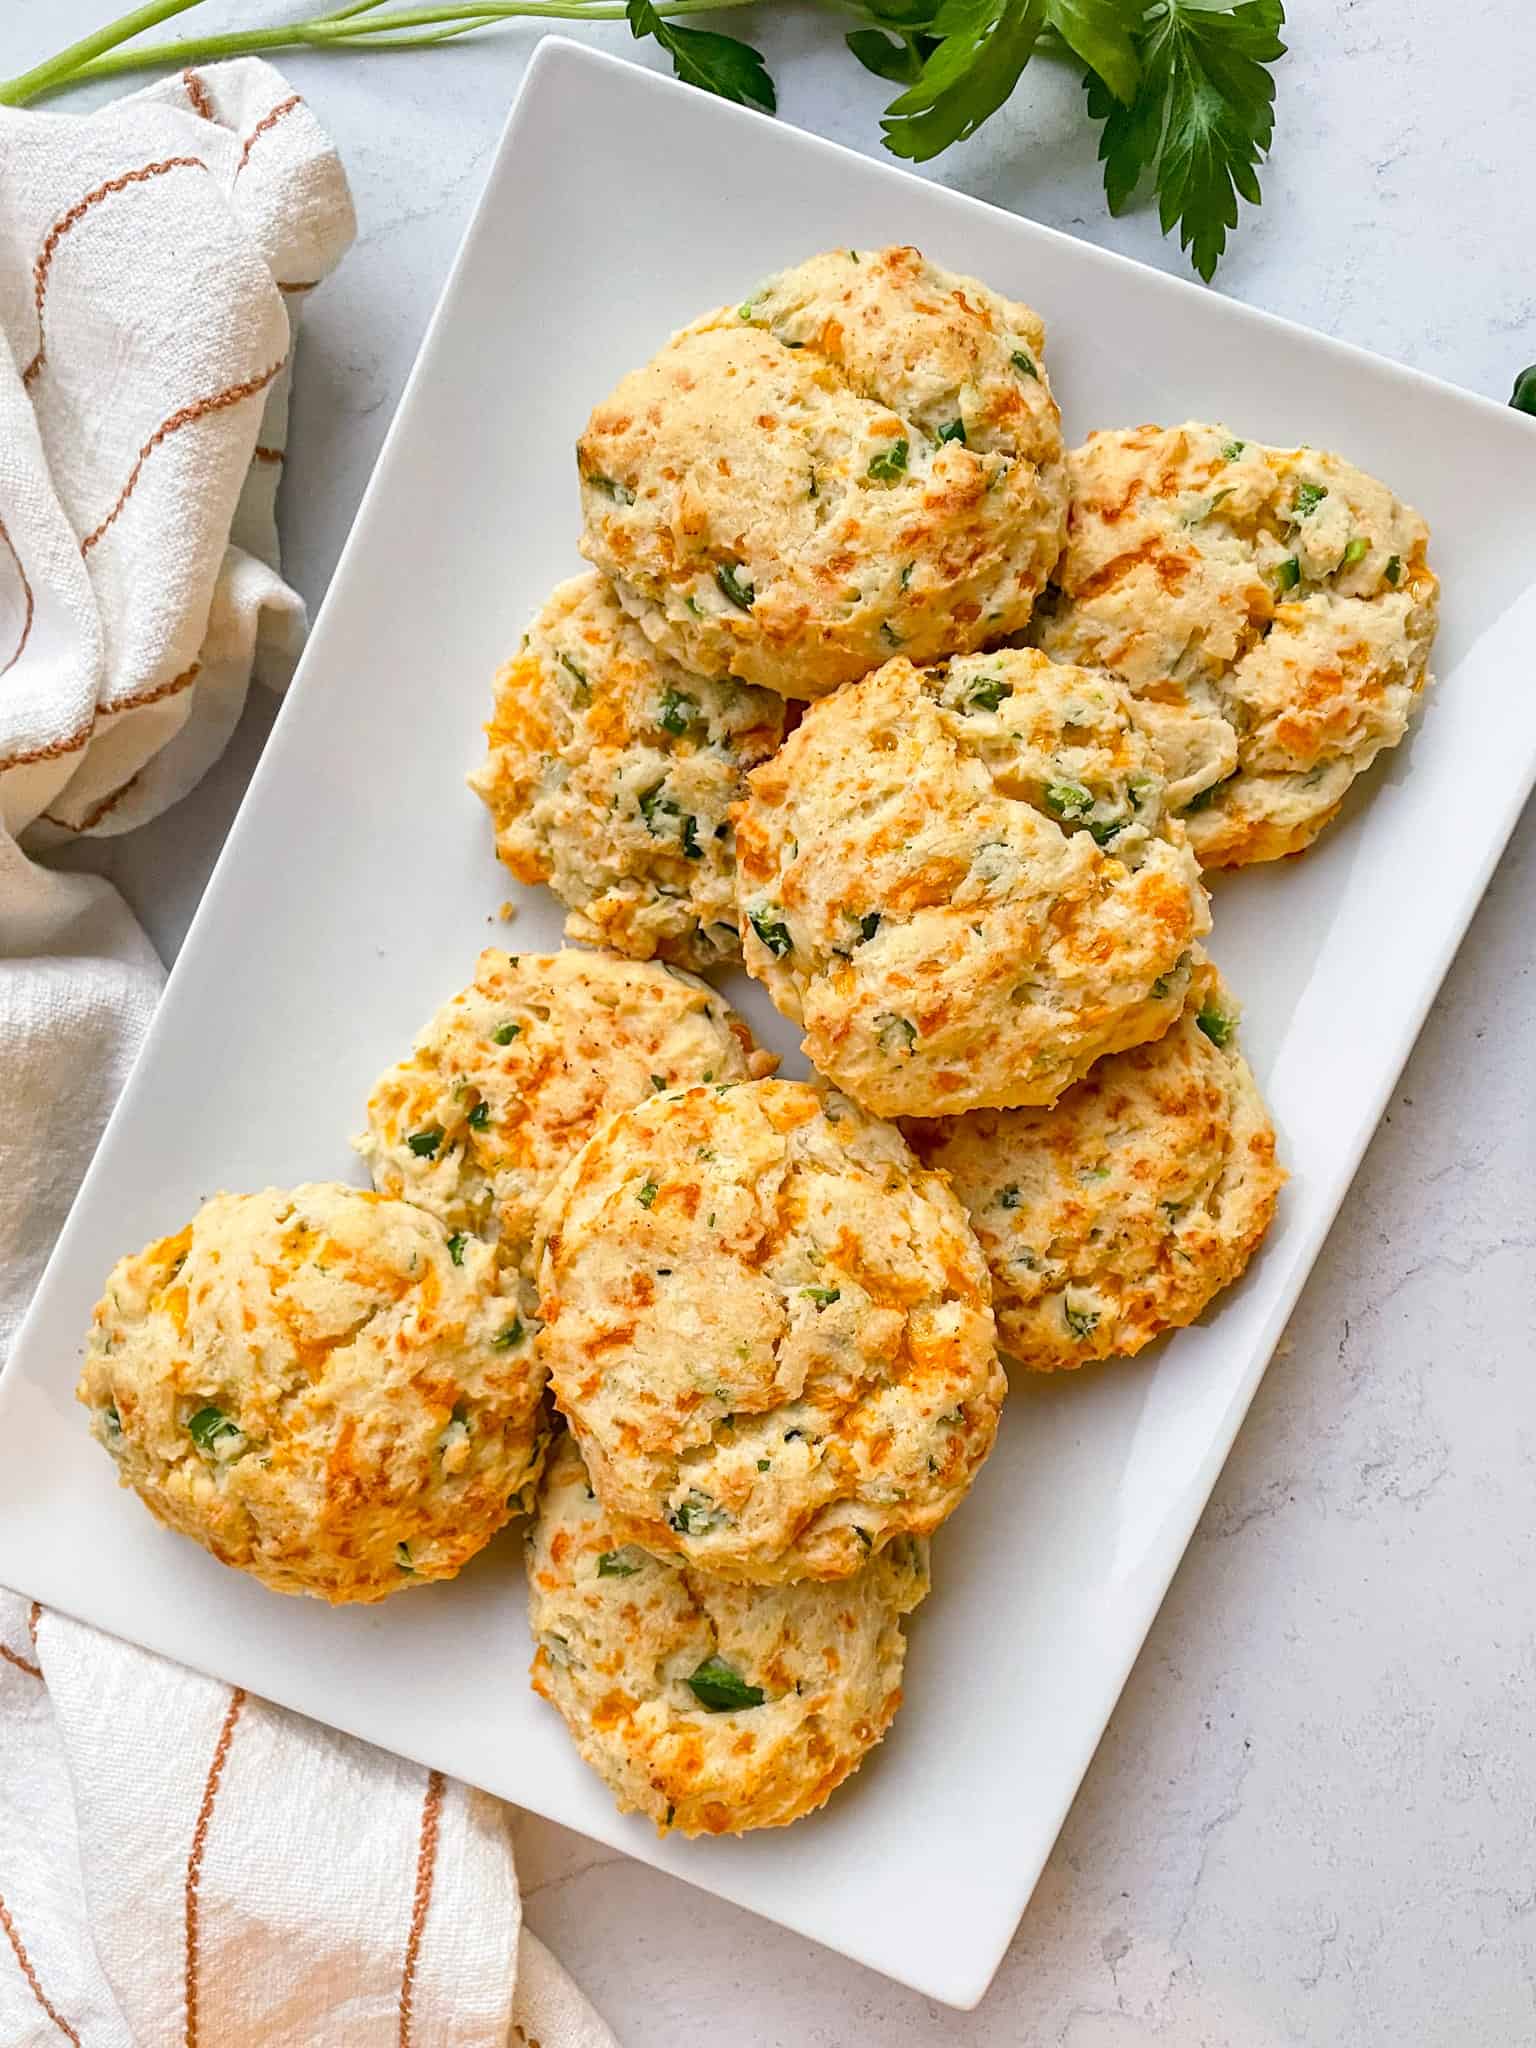 Gluten-Free Jalapeno Cheddar Biscuits